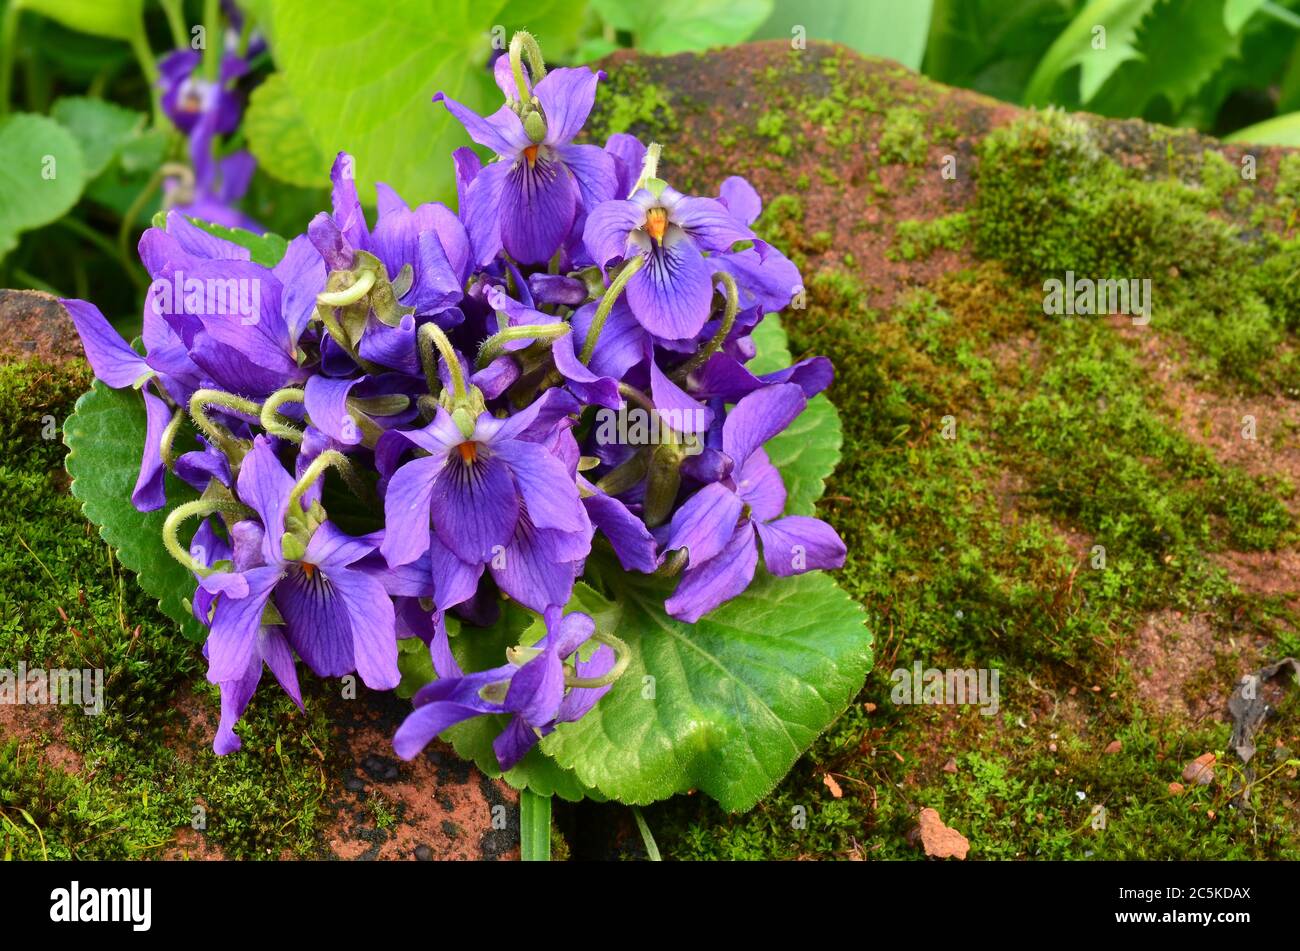 Bouquet of fragrant violets on red stone overgrown with moss Stock Photo